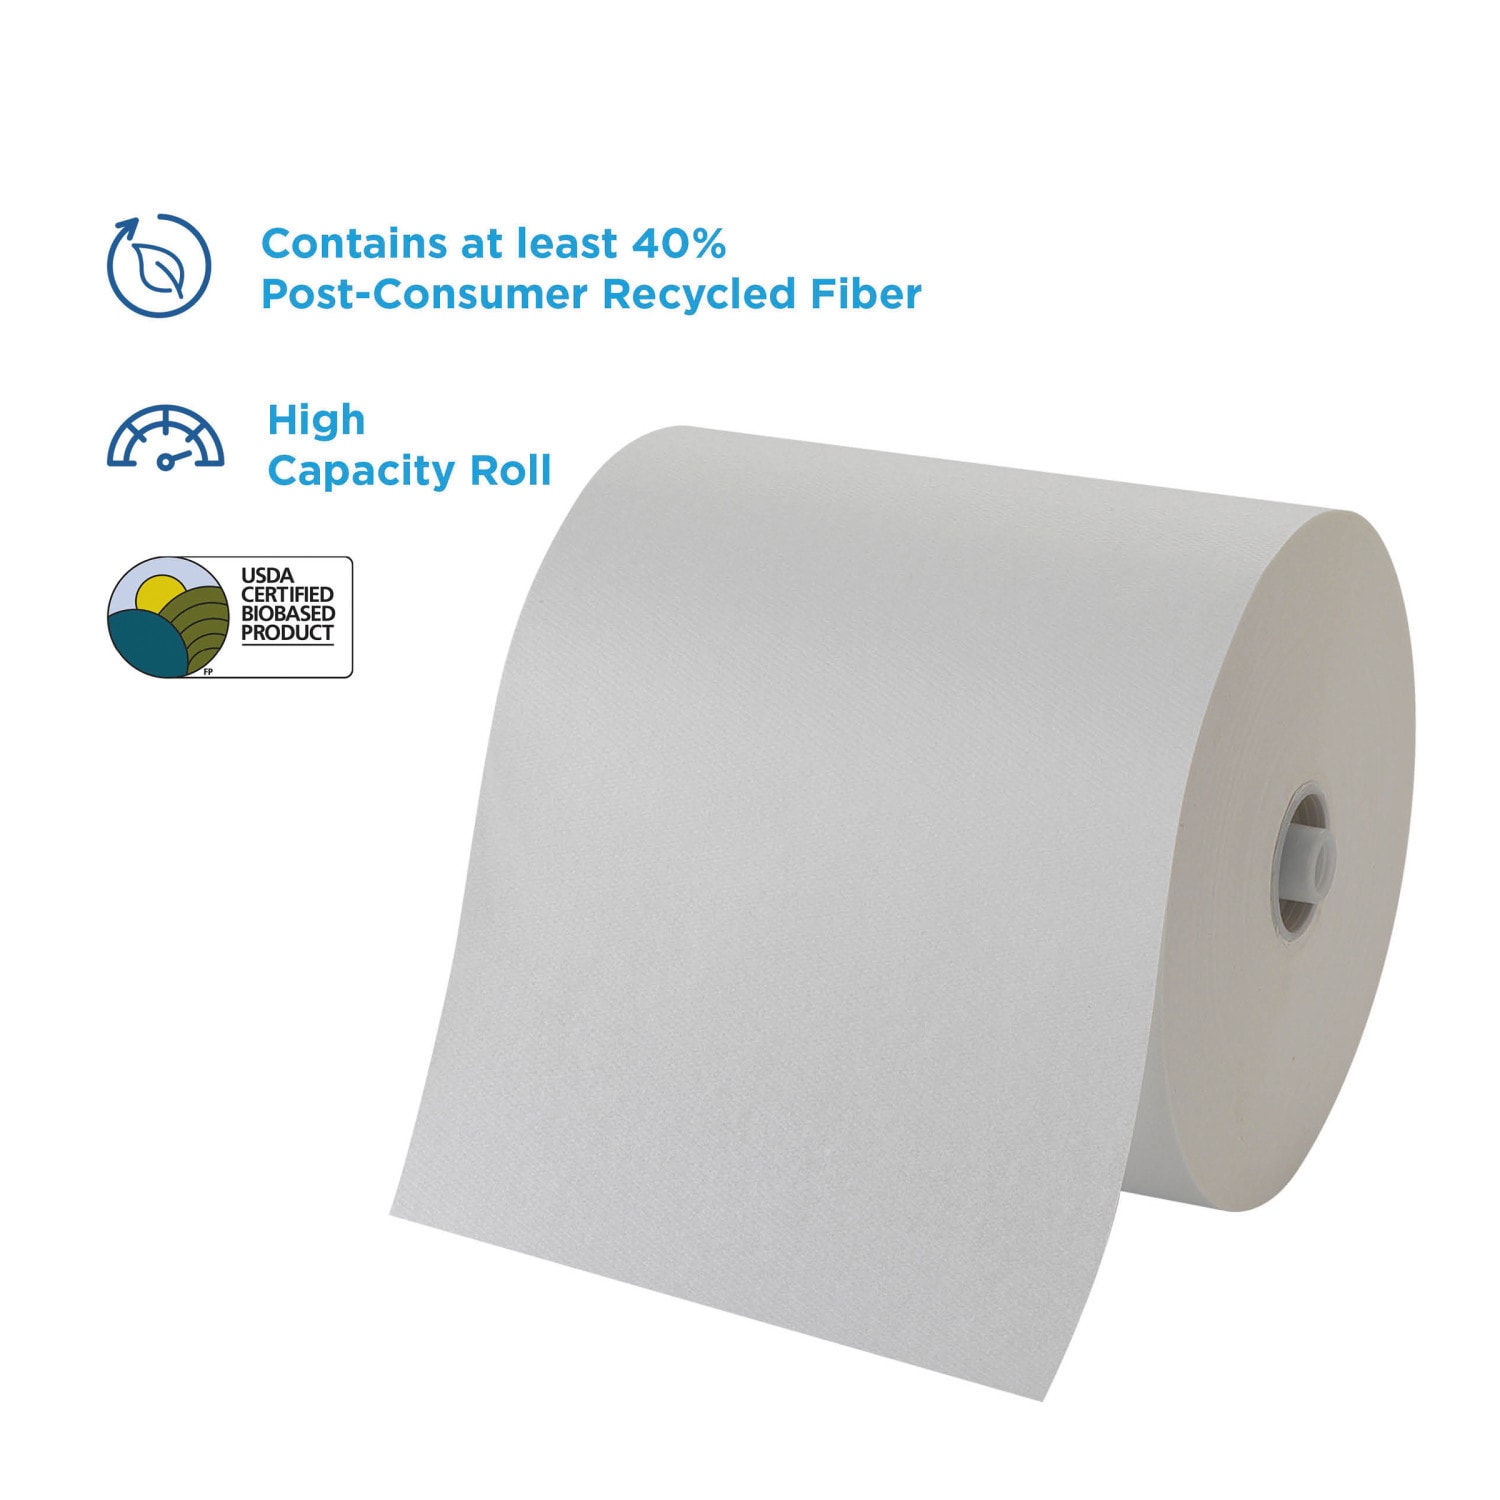 Georgia Pacific Blue Basic Non-Perforated Paper Towel Rolls, 7-7/8